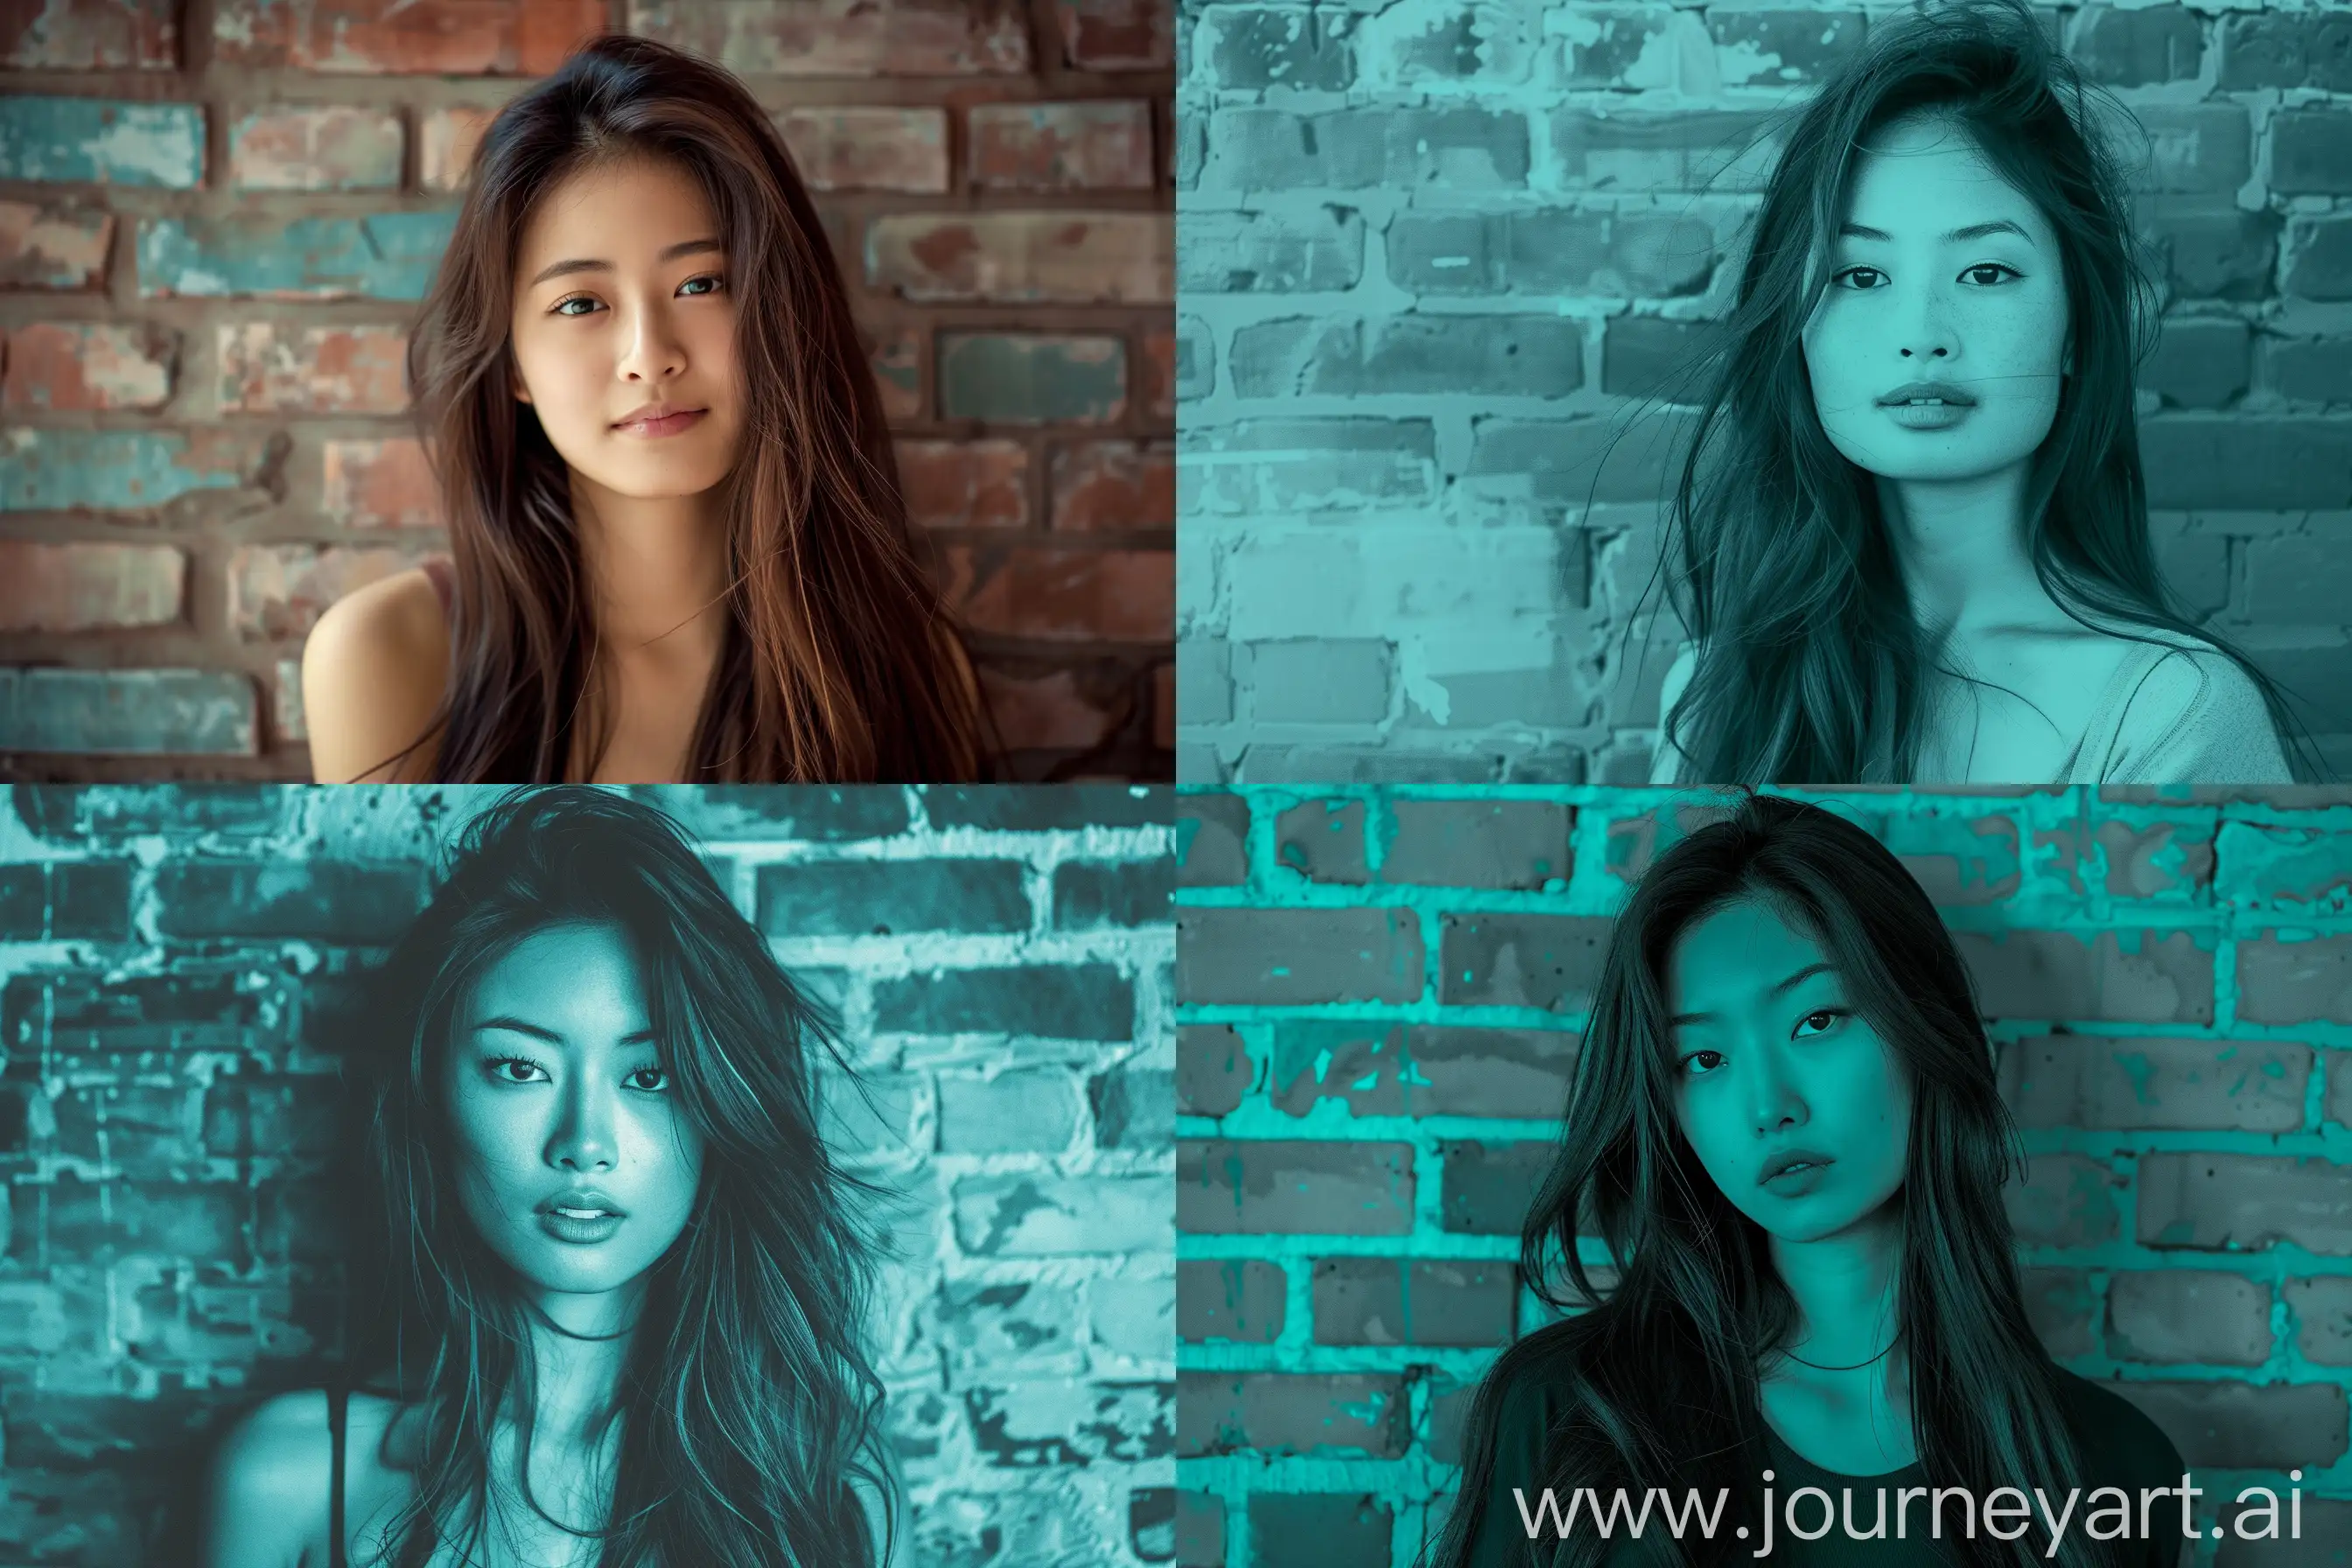  beautiful woman with long hair in front of a brick wall, in the style of light teal and dark indigo, poetcore, asian-inspired, lighthearted, strong facial expression, vibrant colorist, interactive experiences --ar 128:85 --v 6.0 --style raw